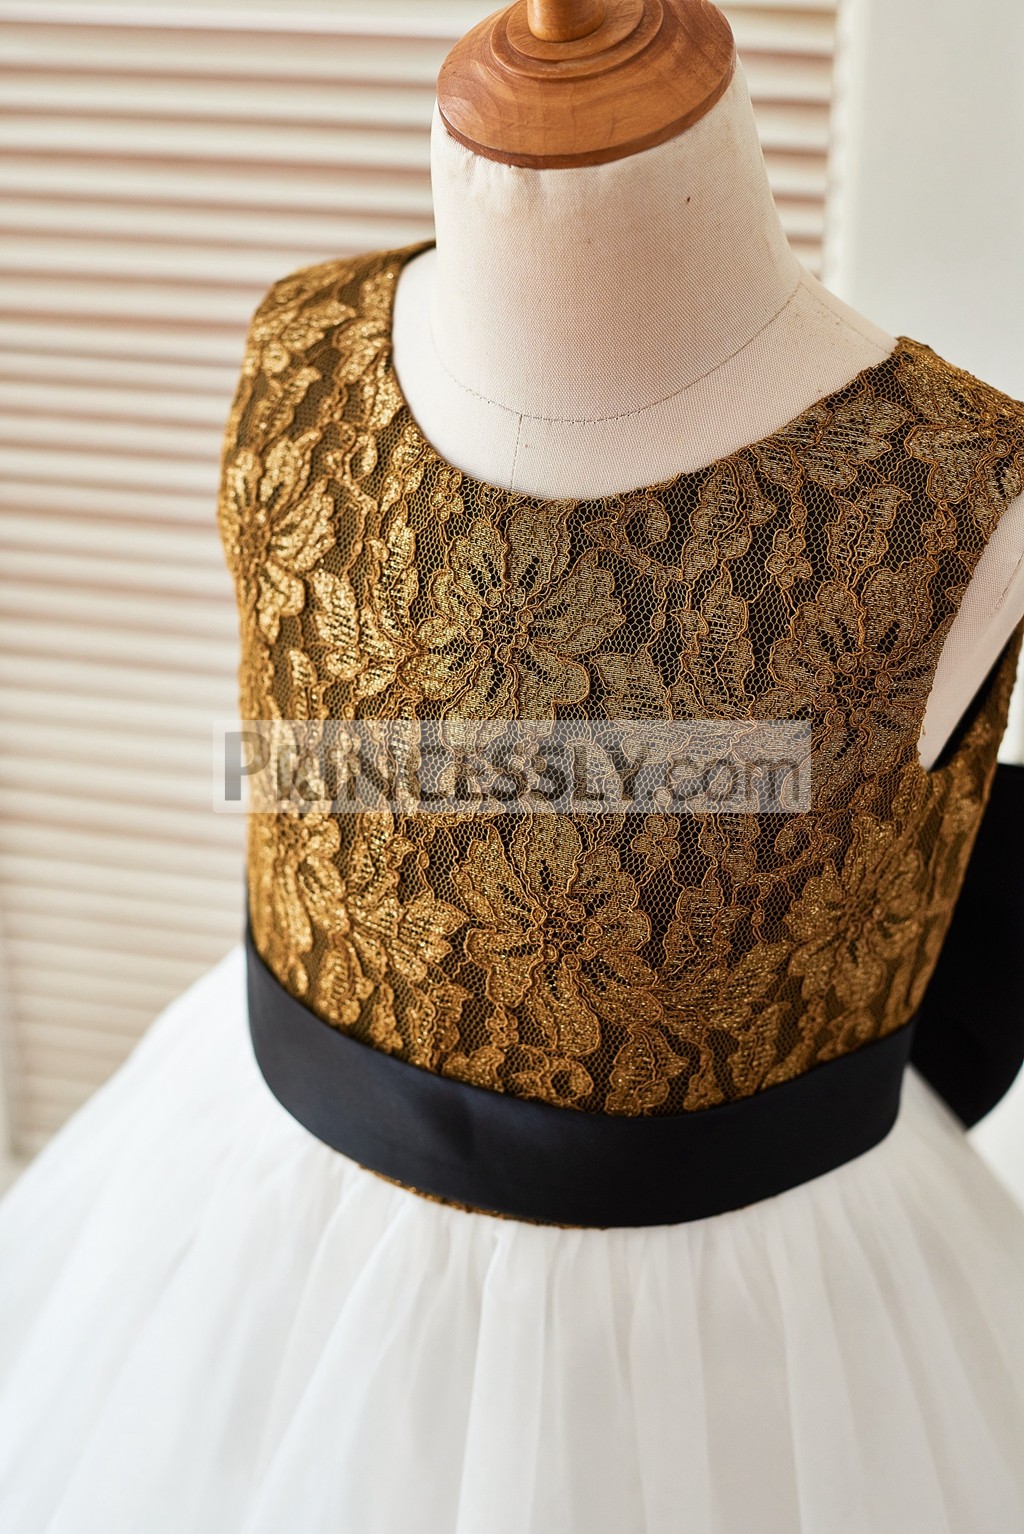 Gold lace bodice in scoop neckline and sleeveless with a black satin belt